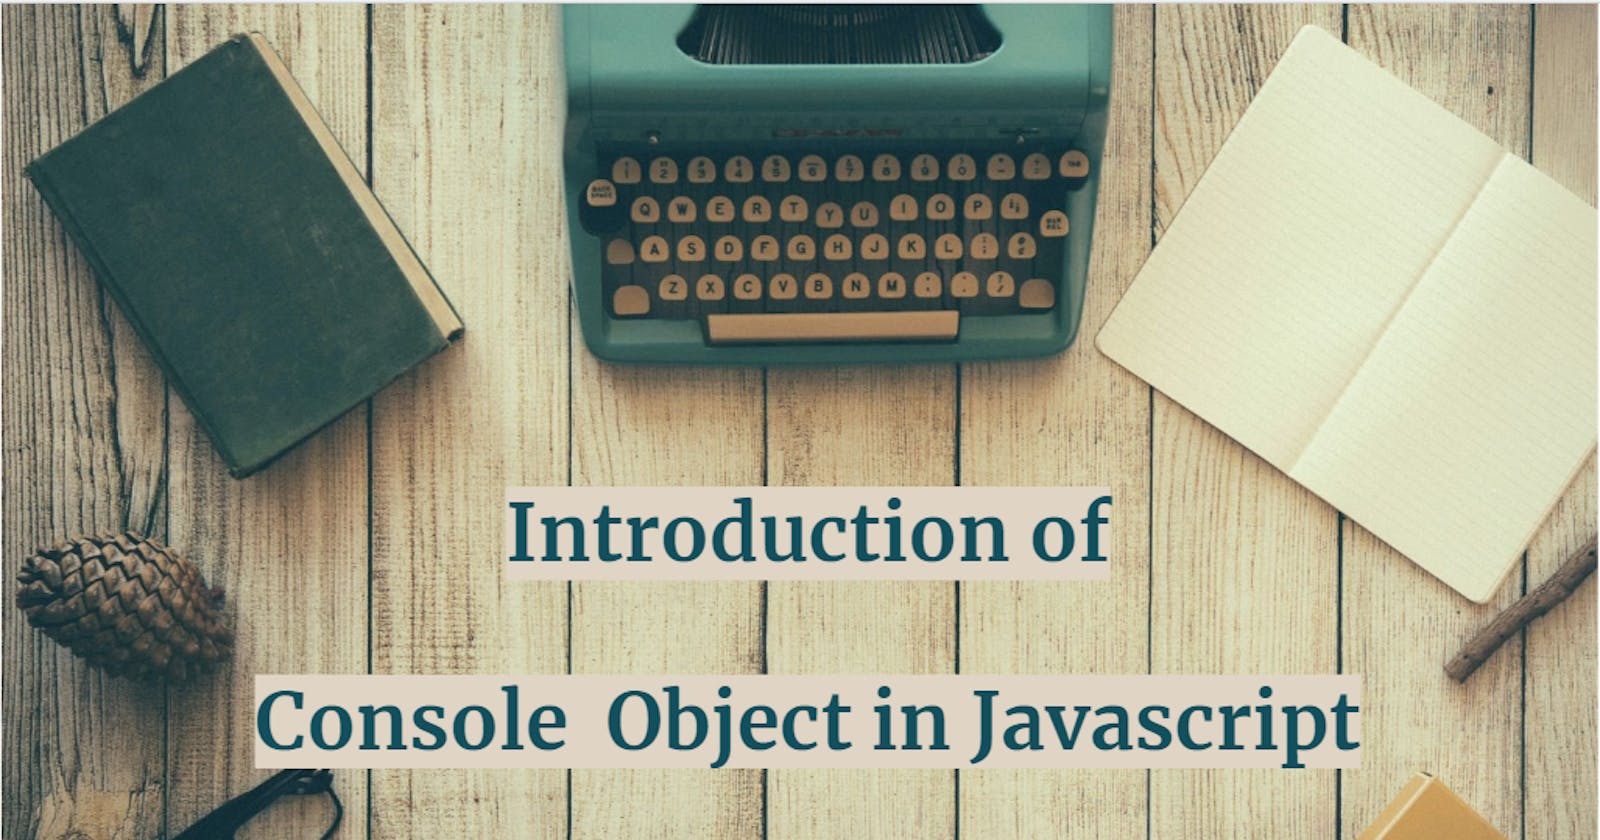 Introduction of Console object in Javascript